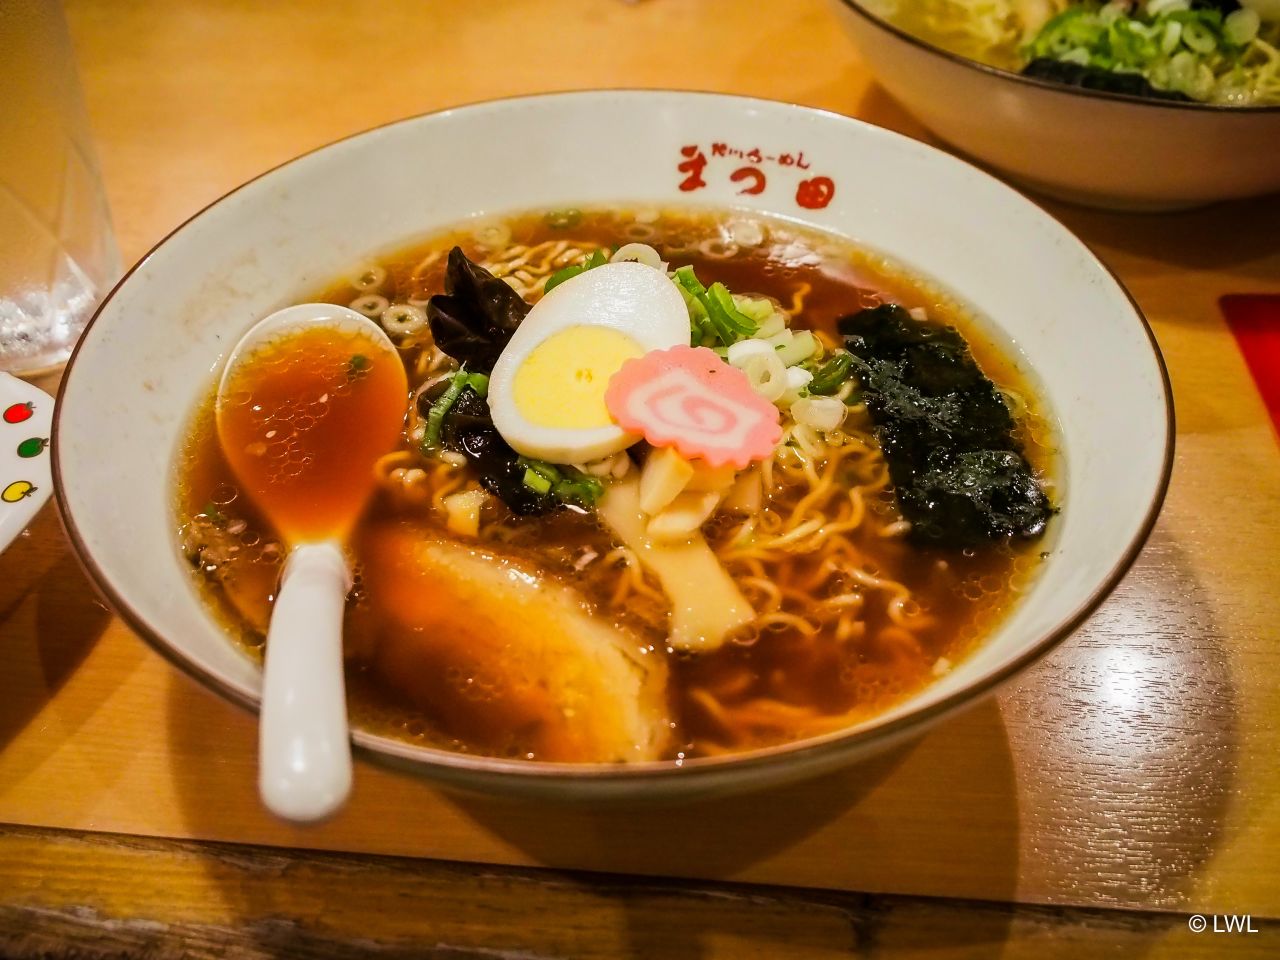 Not all ramen on Hokkaido is miso. Asahikawa's most distinct ramen style is Shoyu, a hearty soup made from pork and chicken bones, then mixed with a seafood broth.